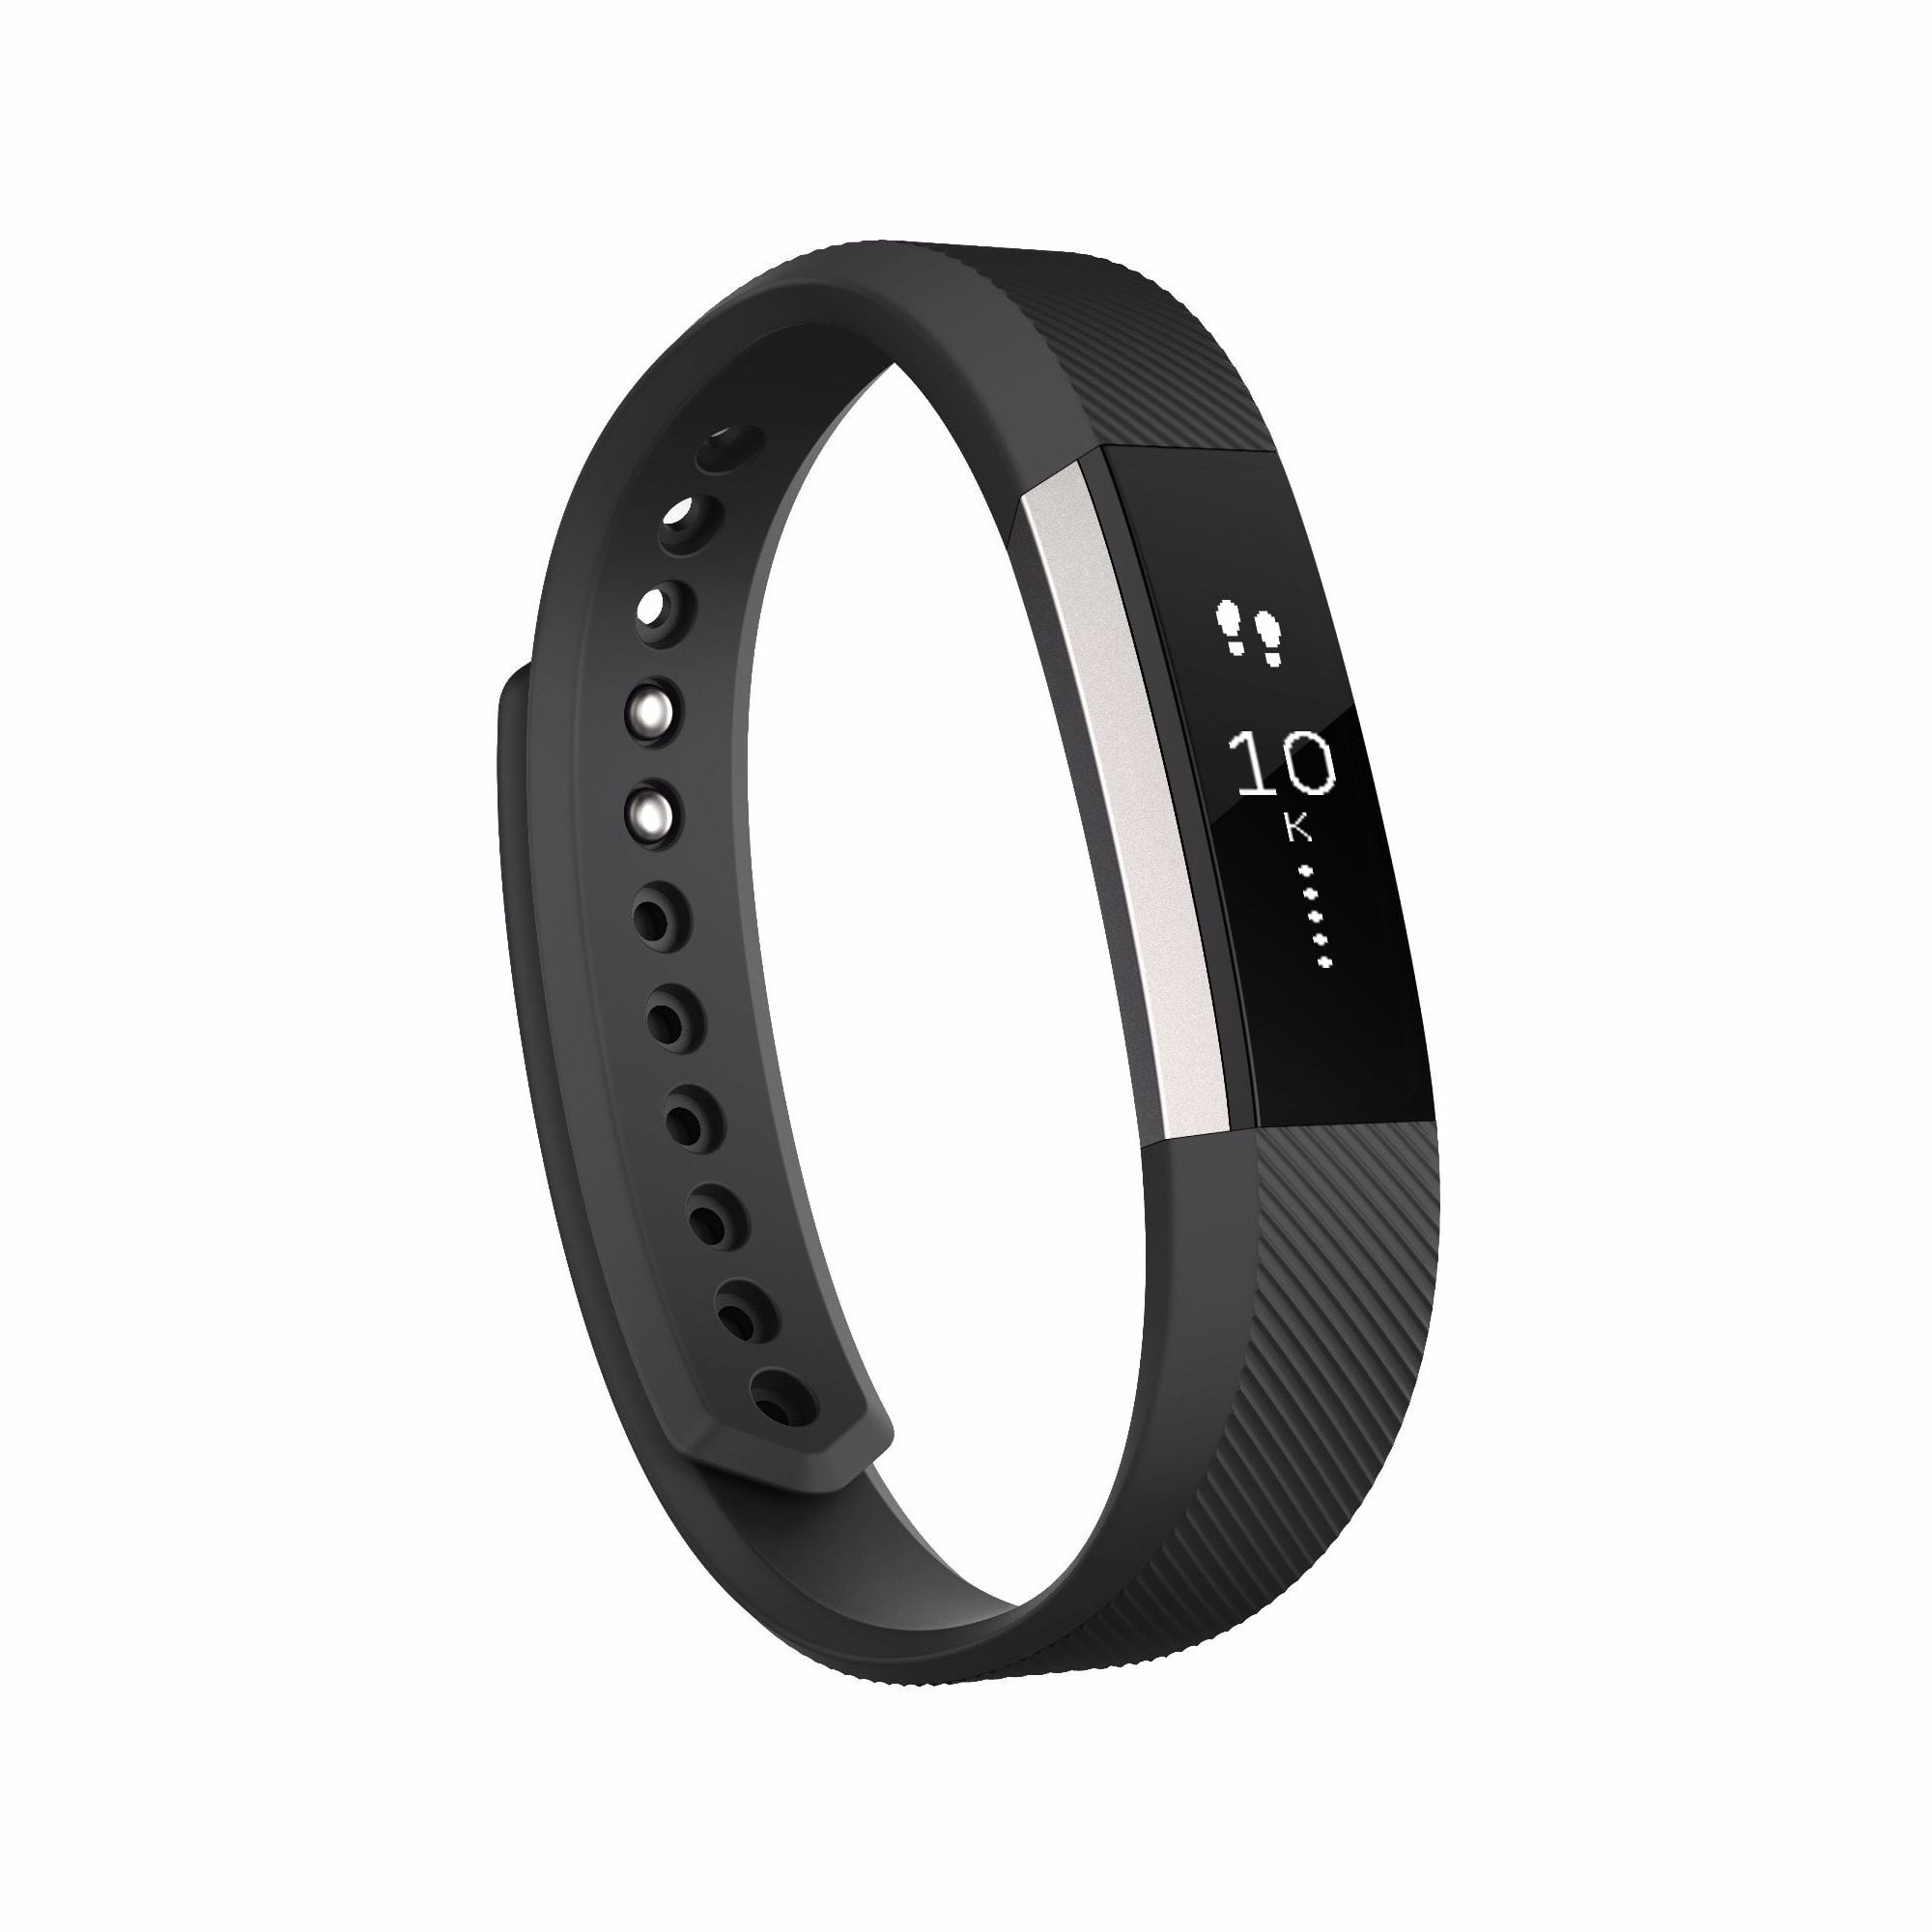 Large Black for sale online Fitbit Surge Wristband Activity Tracker 